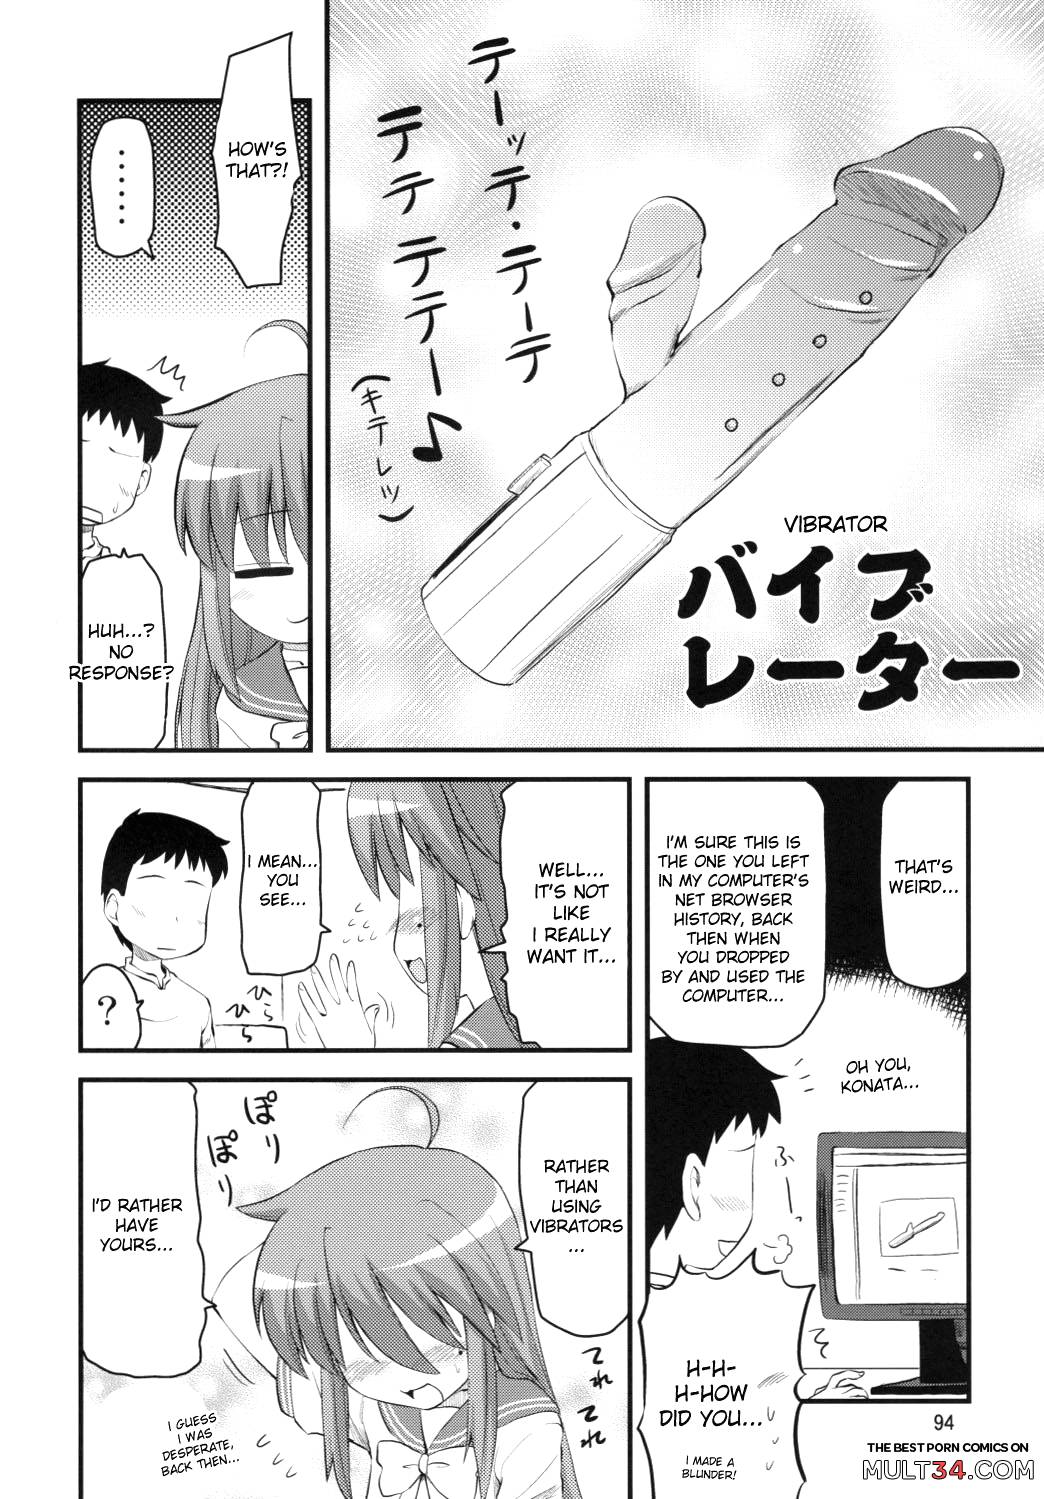 Konata and Oh-zu 4 people each and every one + 1 page 74